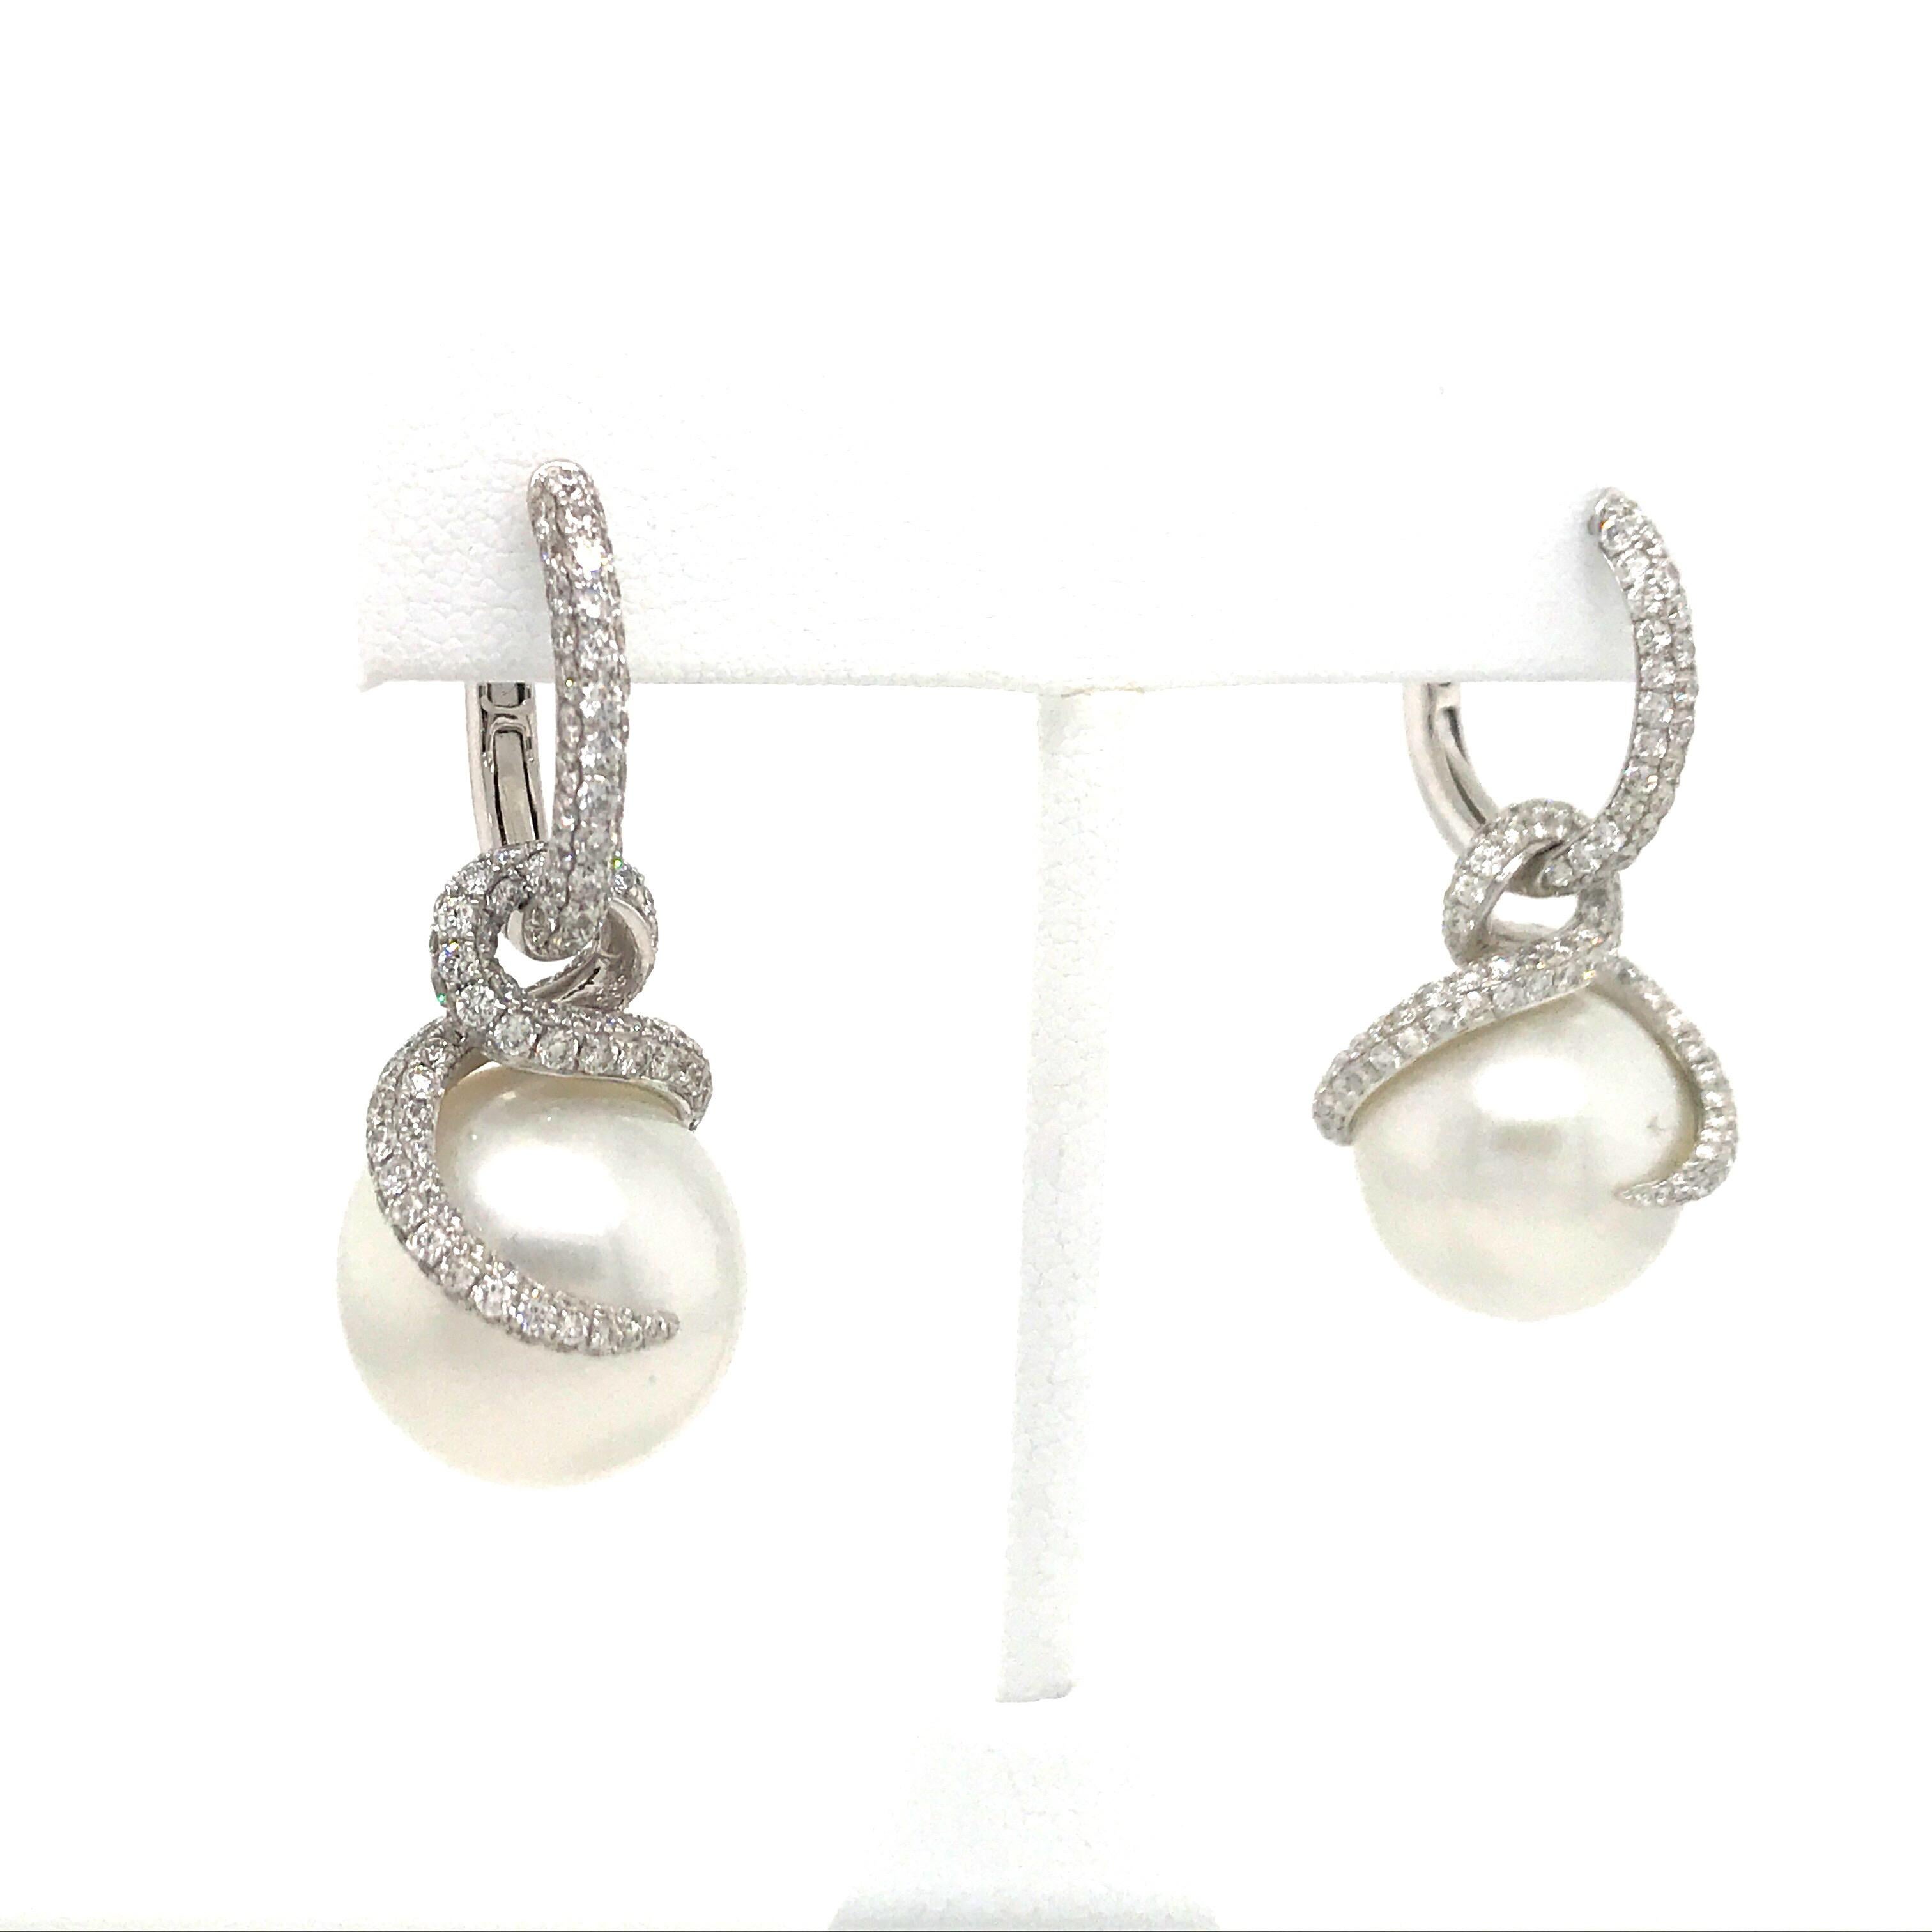 18K White gold earrings featuring two pearls measuring 15 mm and a diamond flame motif weighing 3.98 carats. Top of the earrings can be worn alone as a hoop. 
Color G
Clarity VS-SI

Hoop measures 0.75 inches